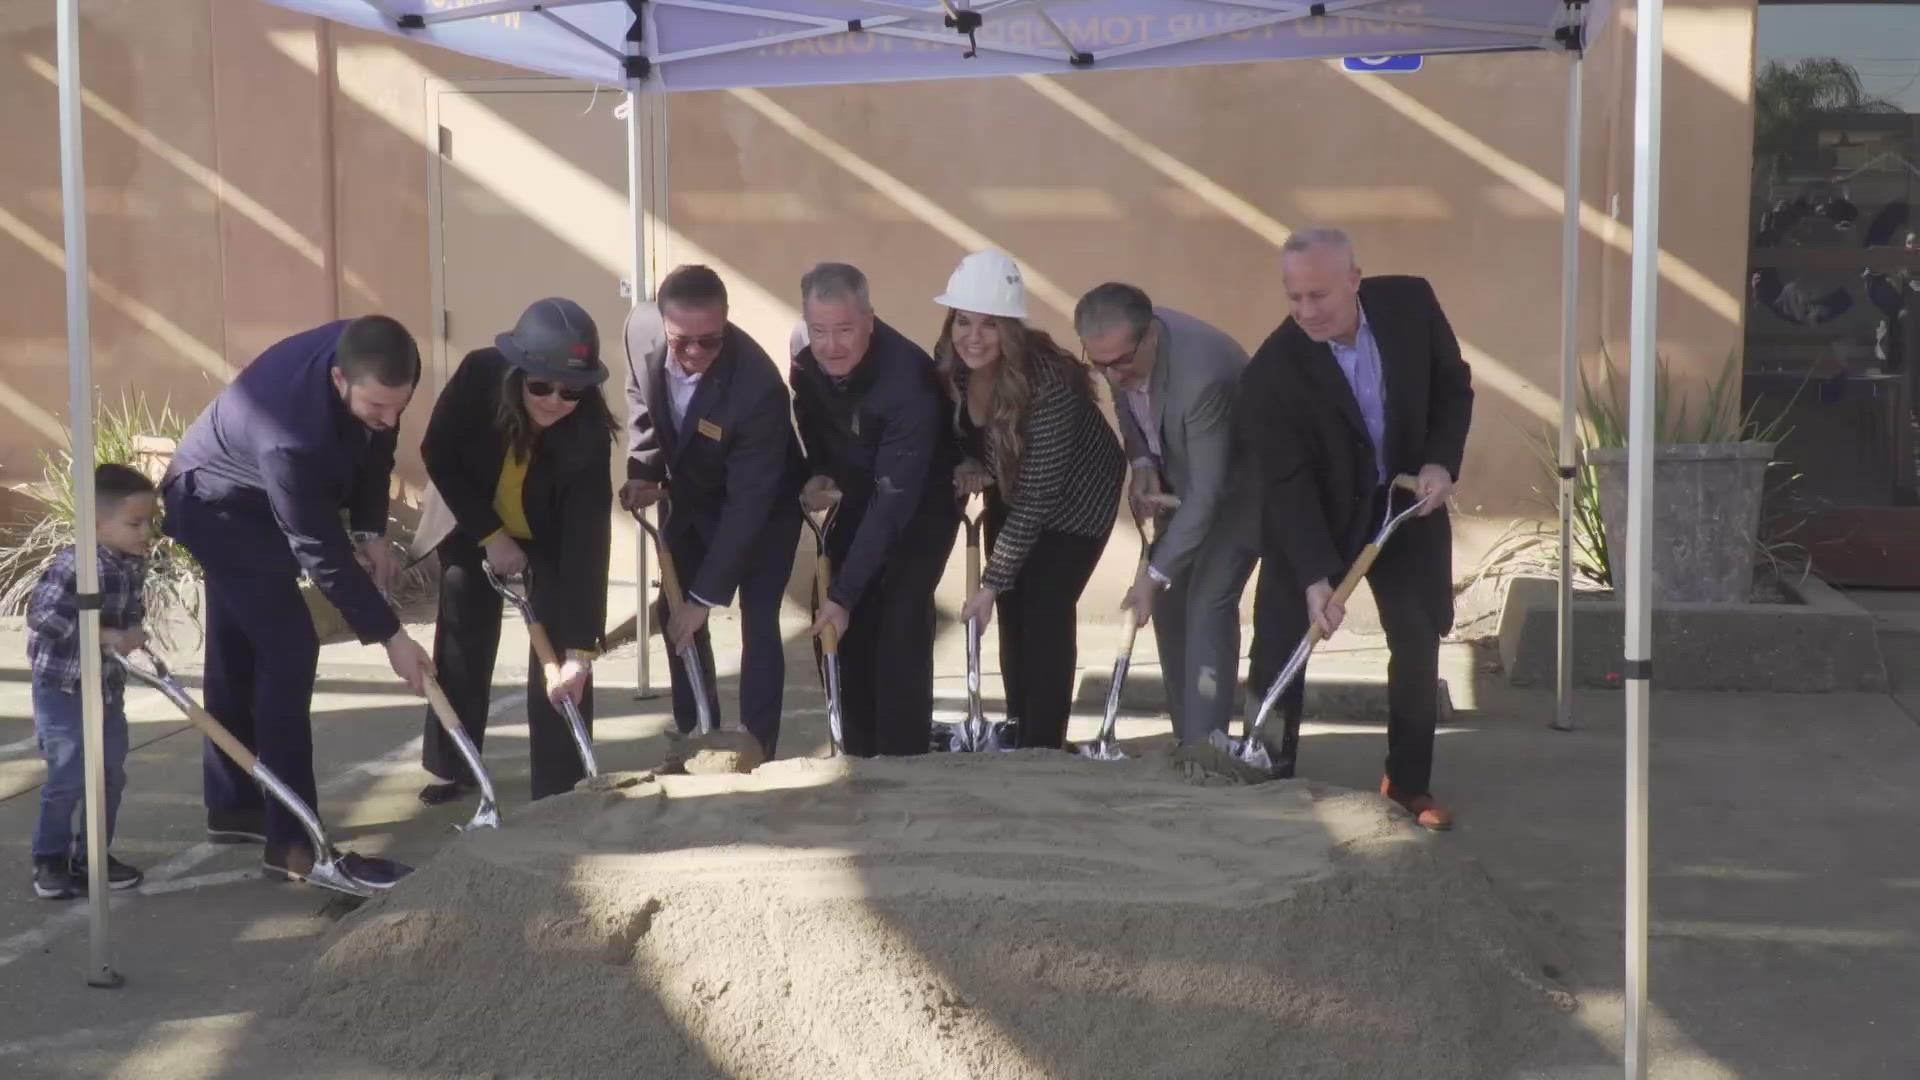 Capital College & Career Academy will transform from a long-vacant property at 501 Arden Way in Del Paso Heights into a thriving center for education and innovation.